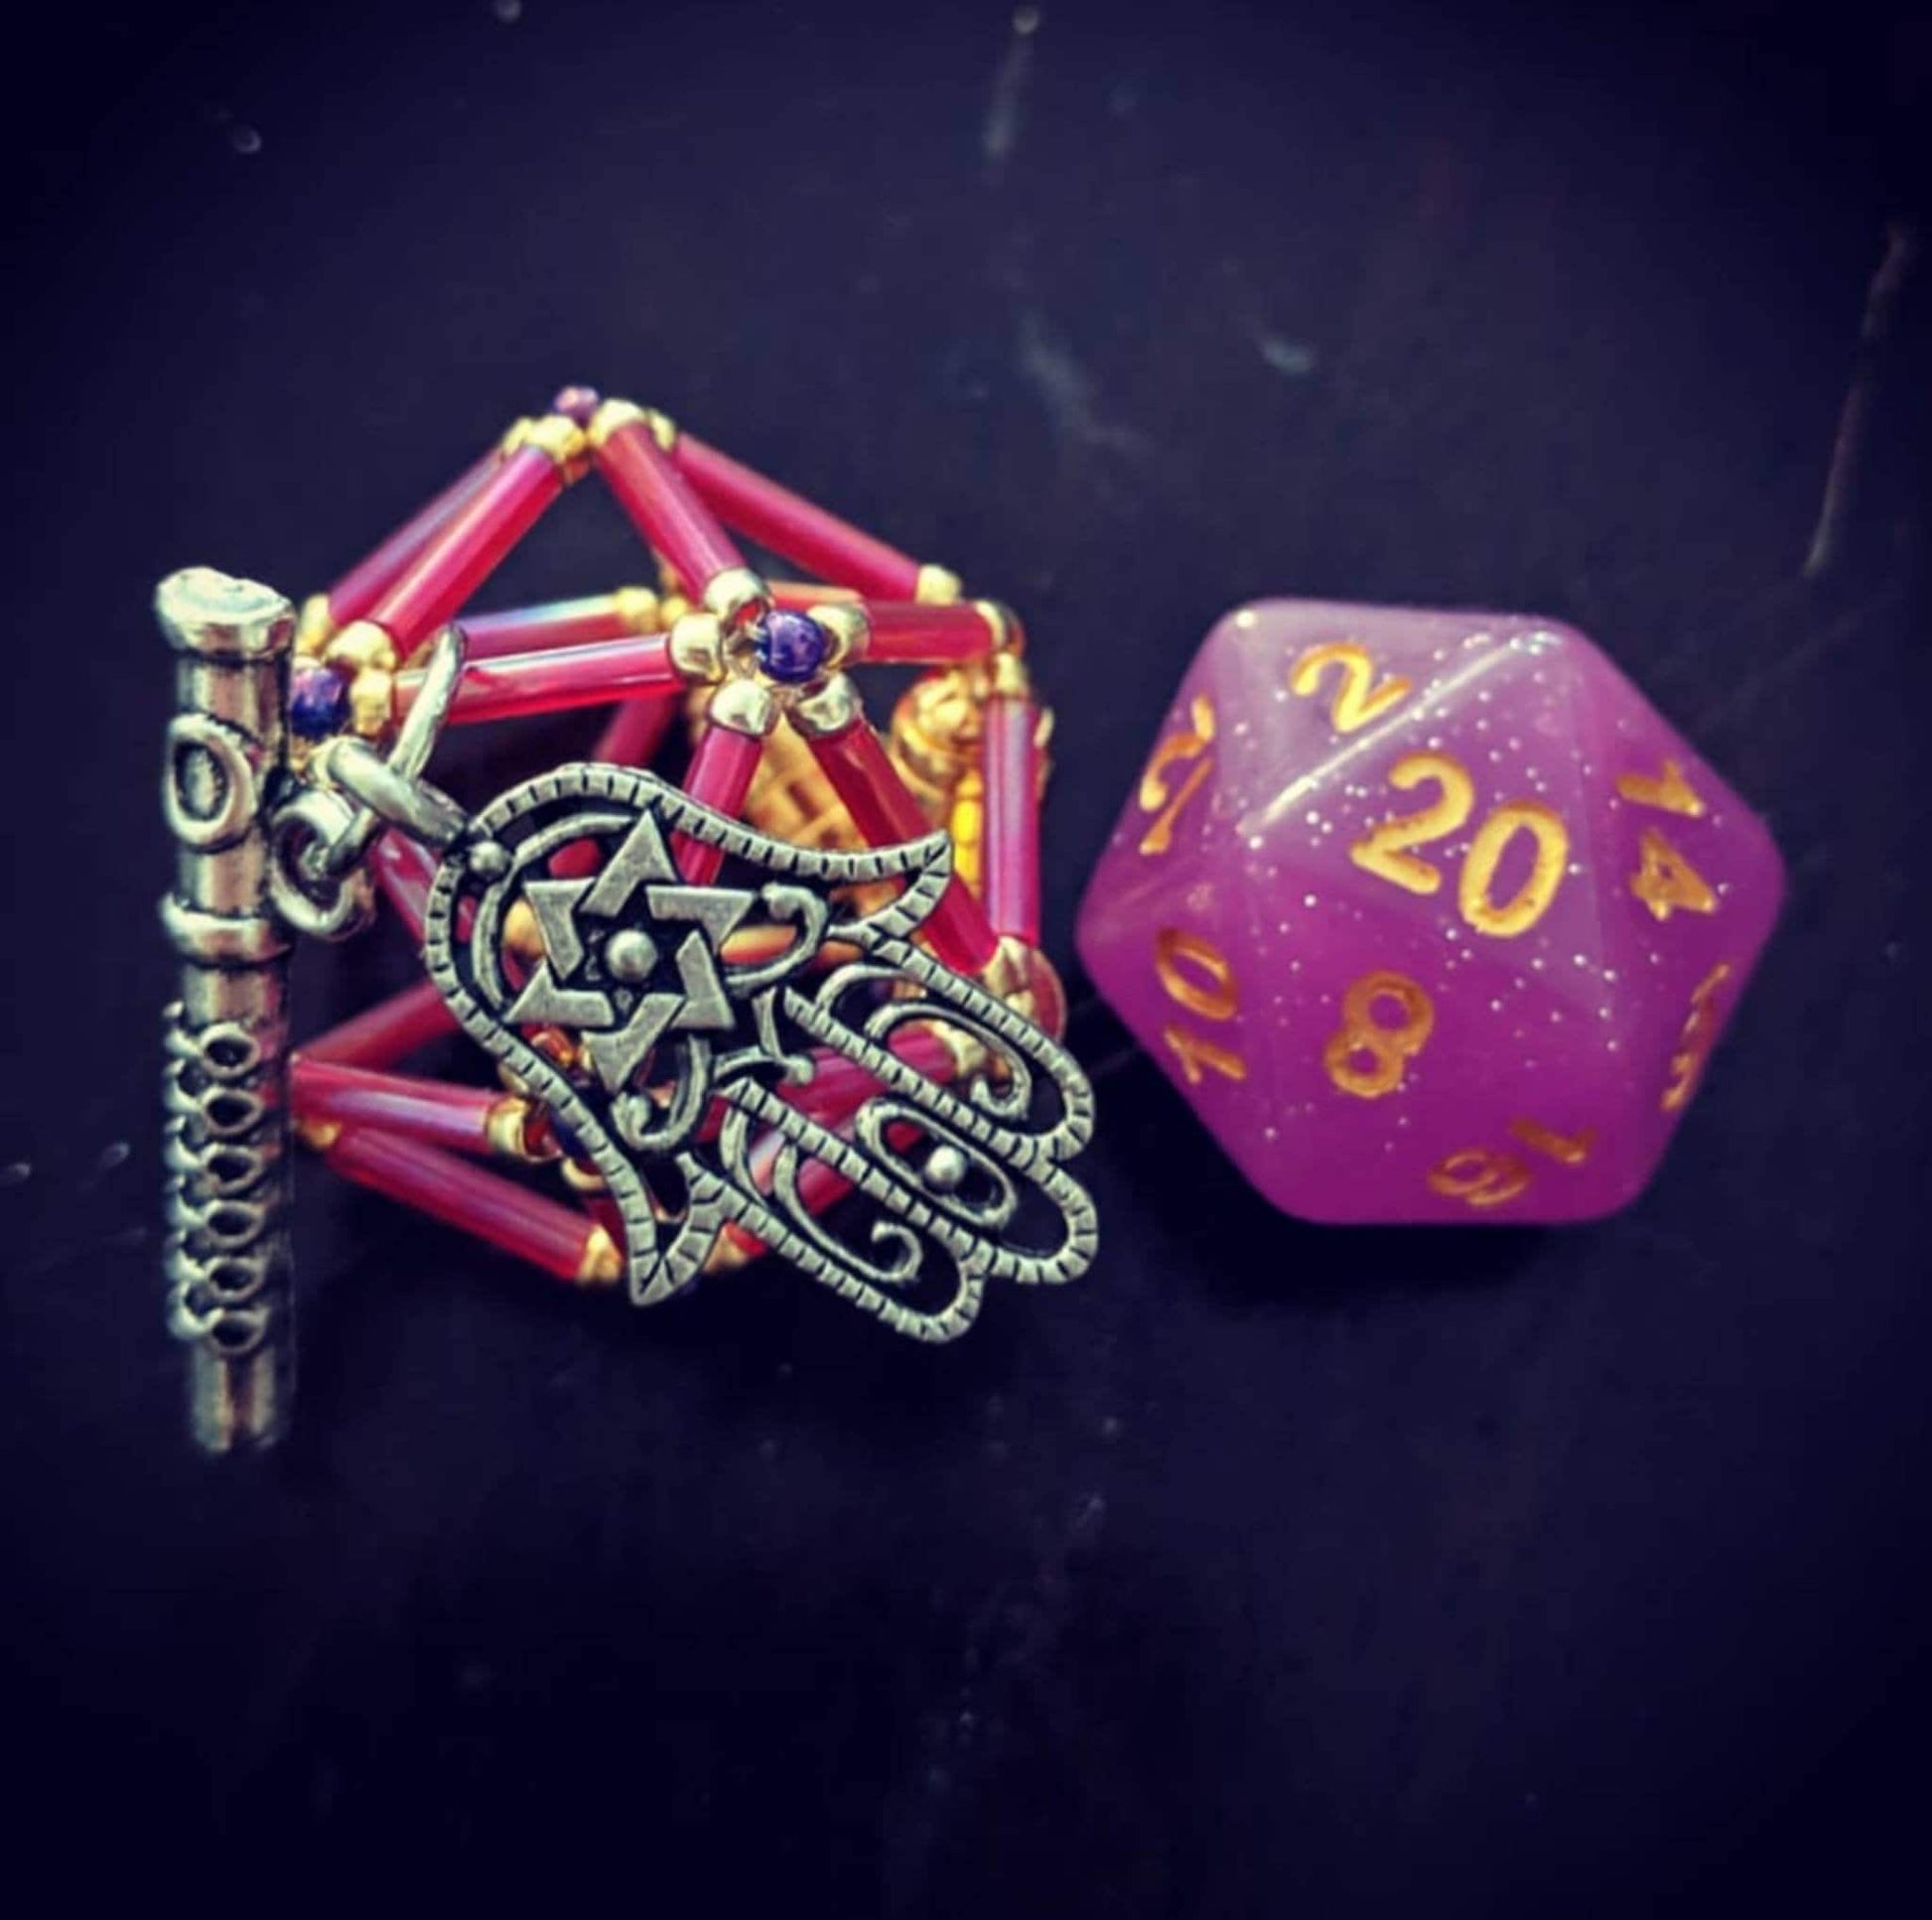 Scanlan necklace: pink, gold flower D20 cage with purple accent beads. Two charms: flue and hand.